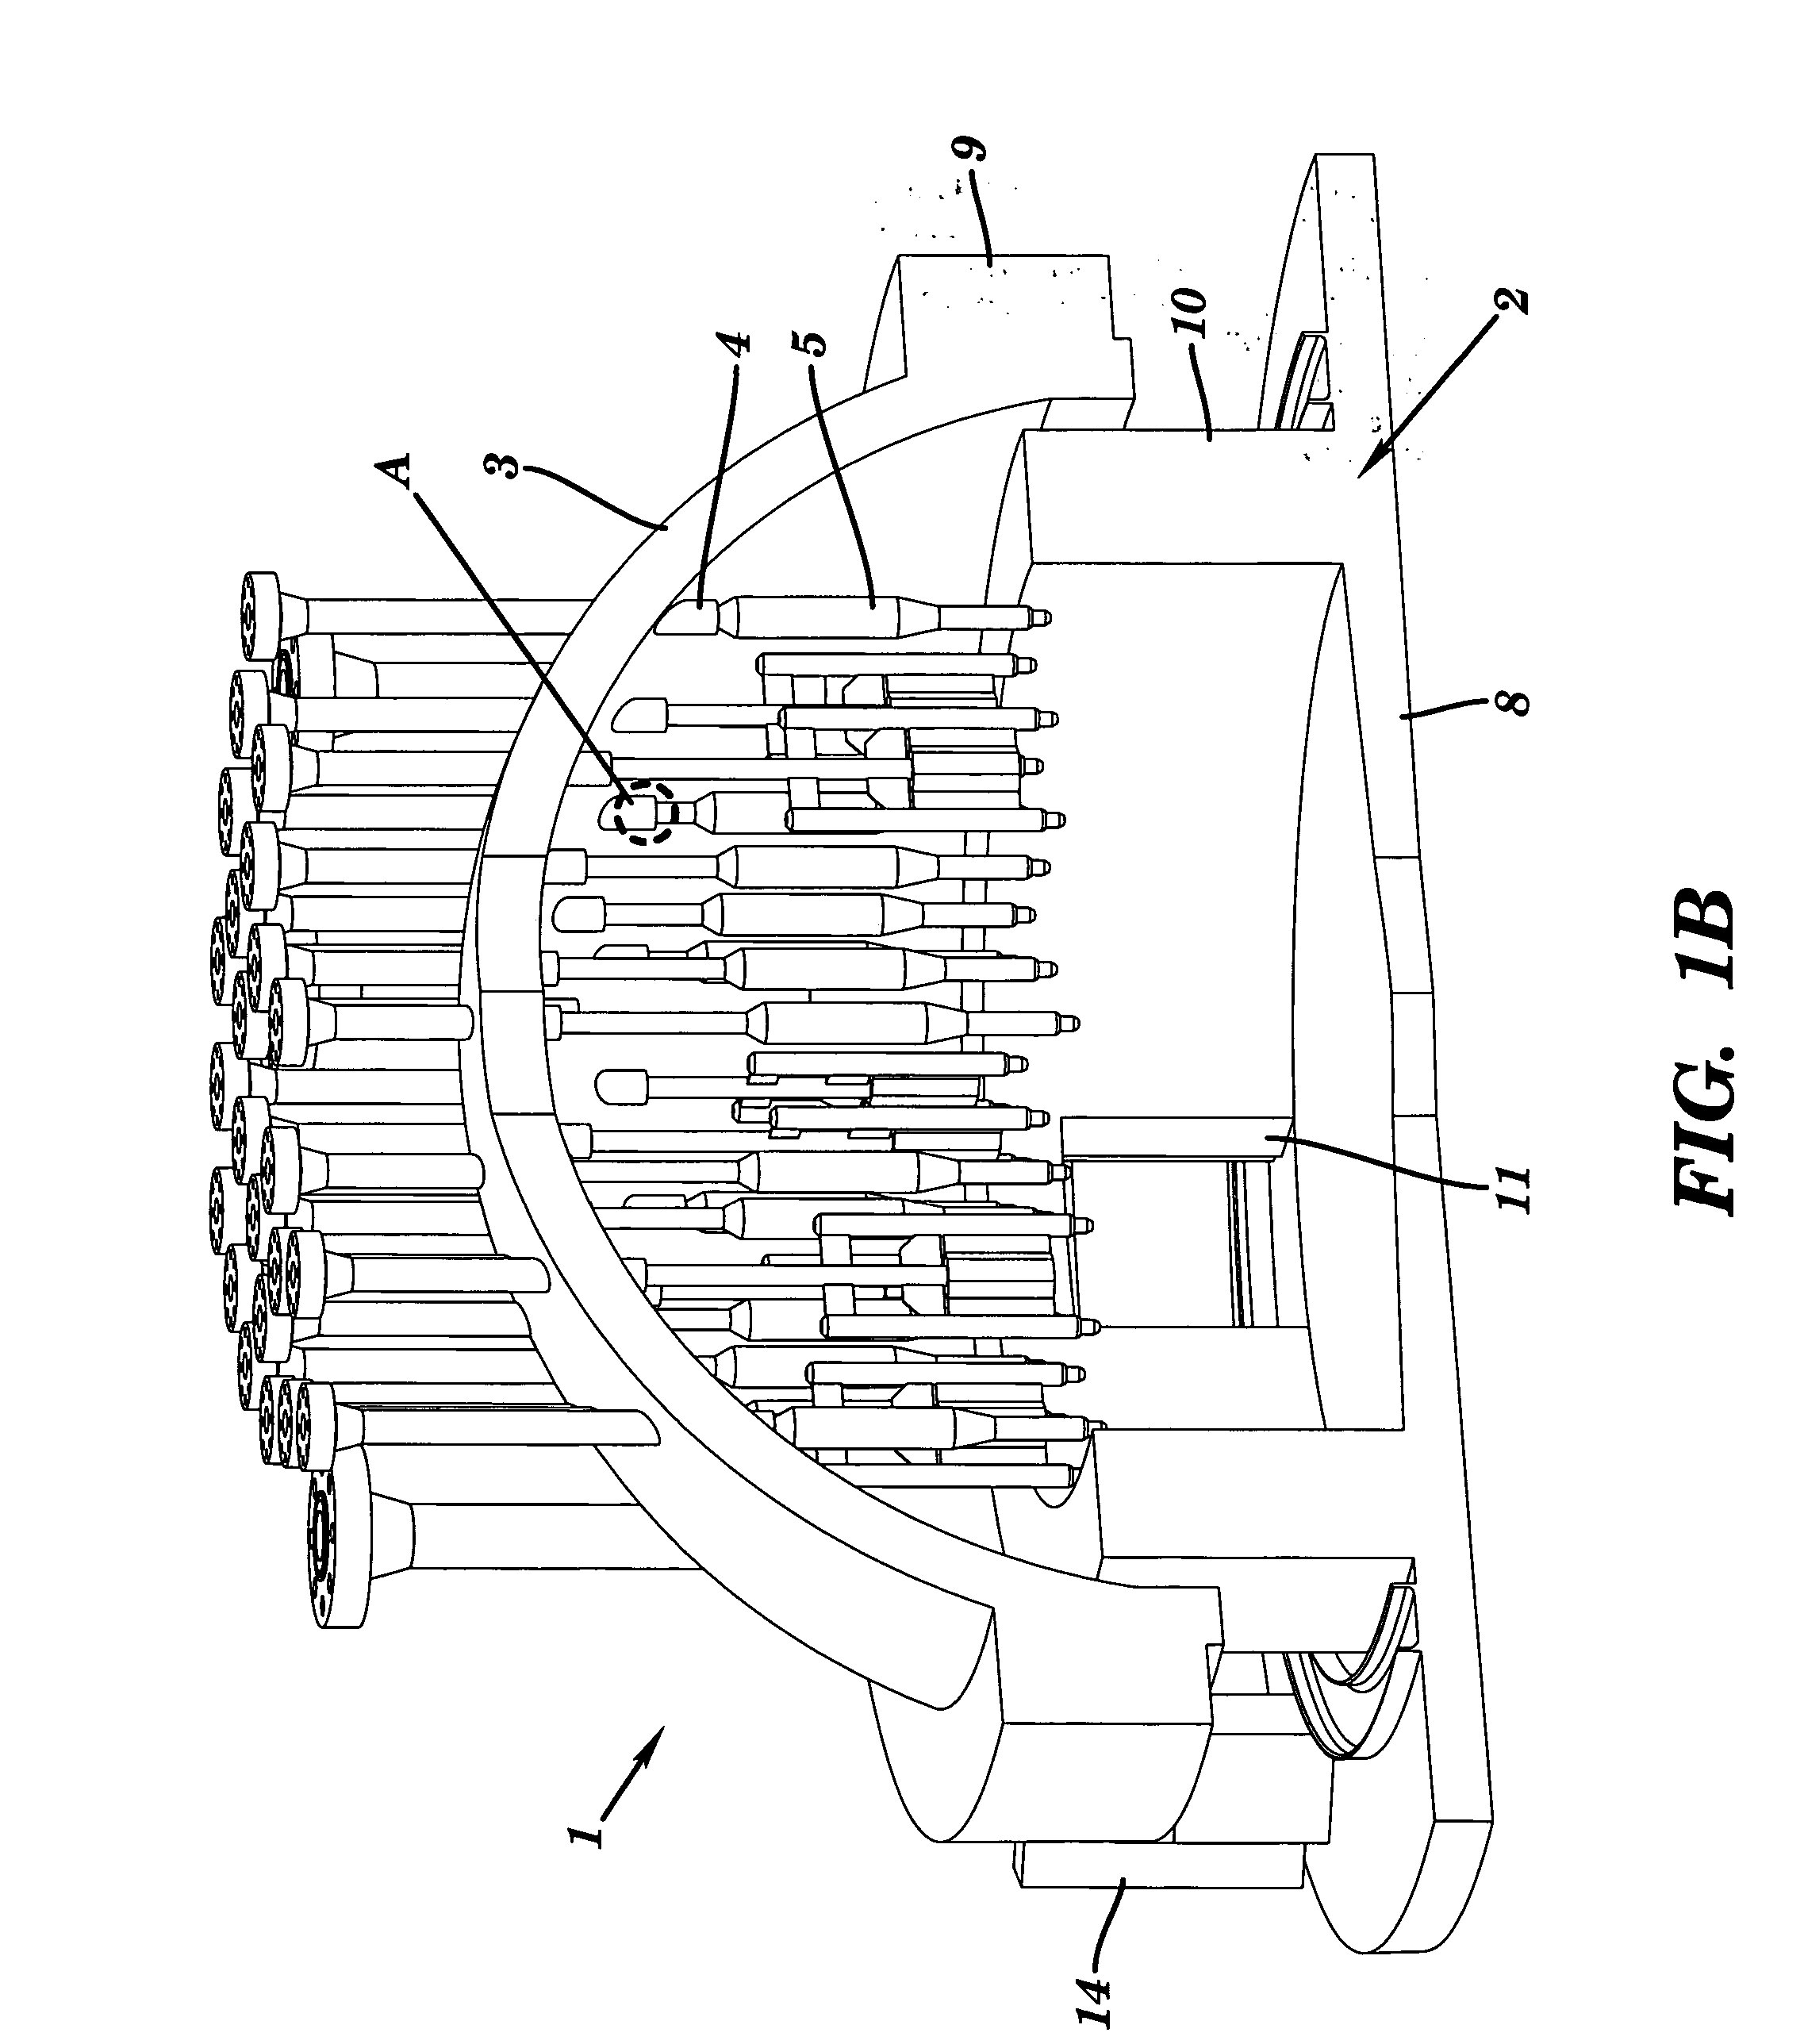 Method and apparatus for inspection of reactor head components